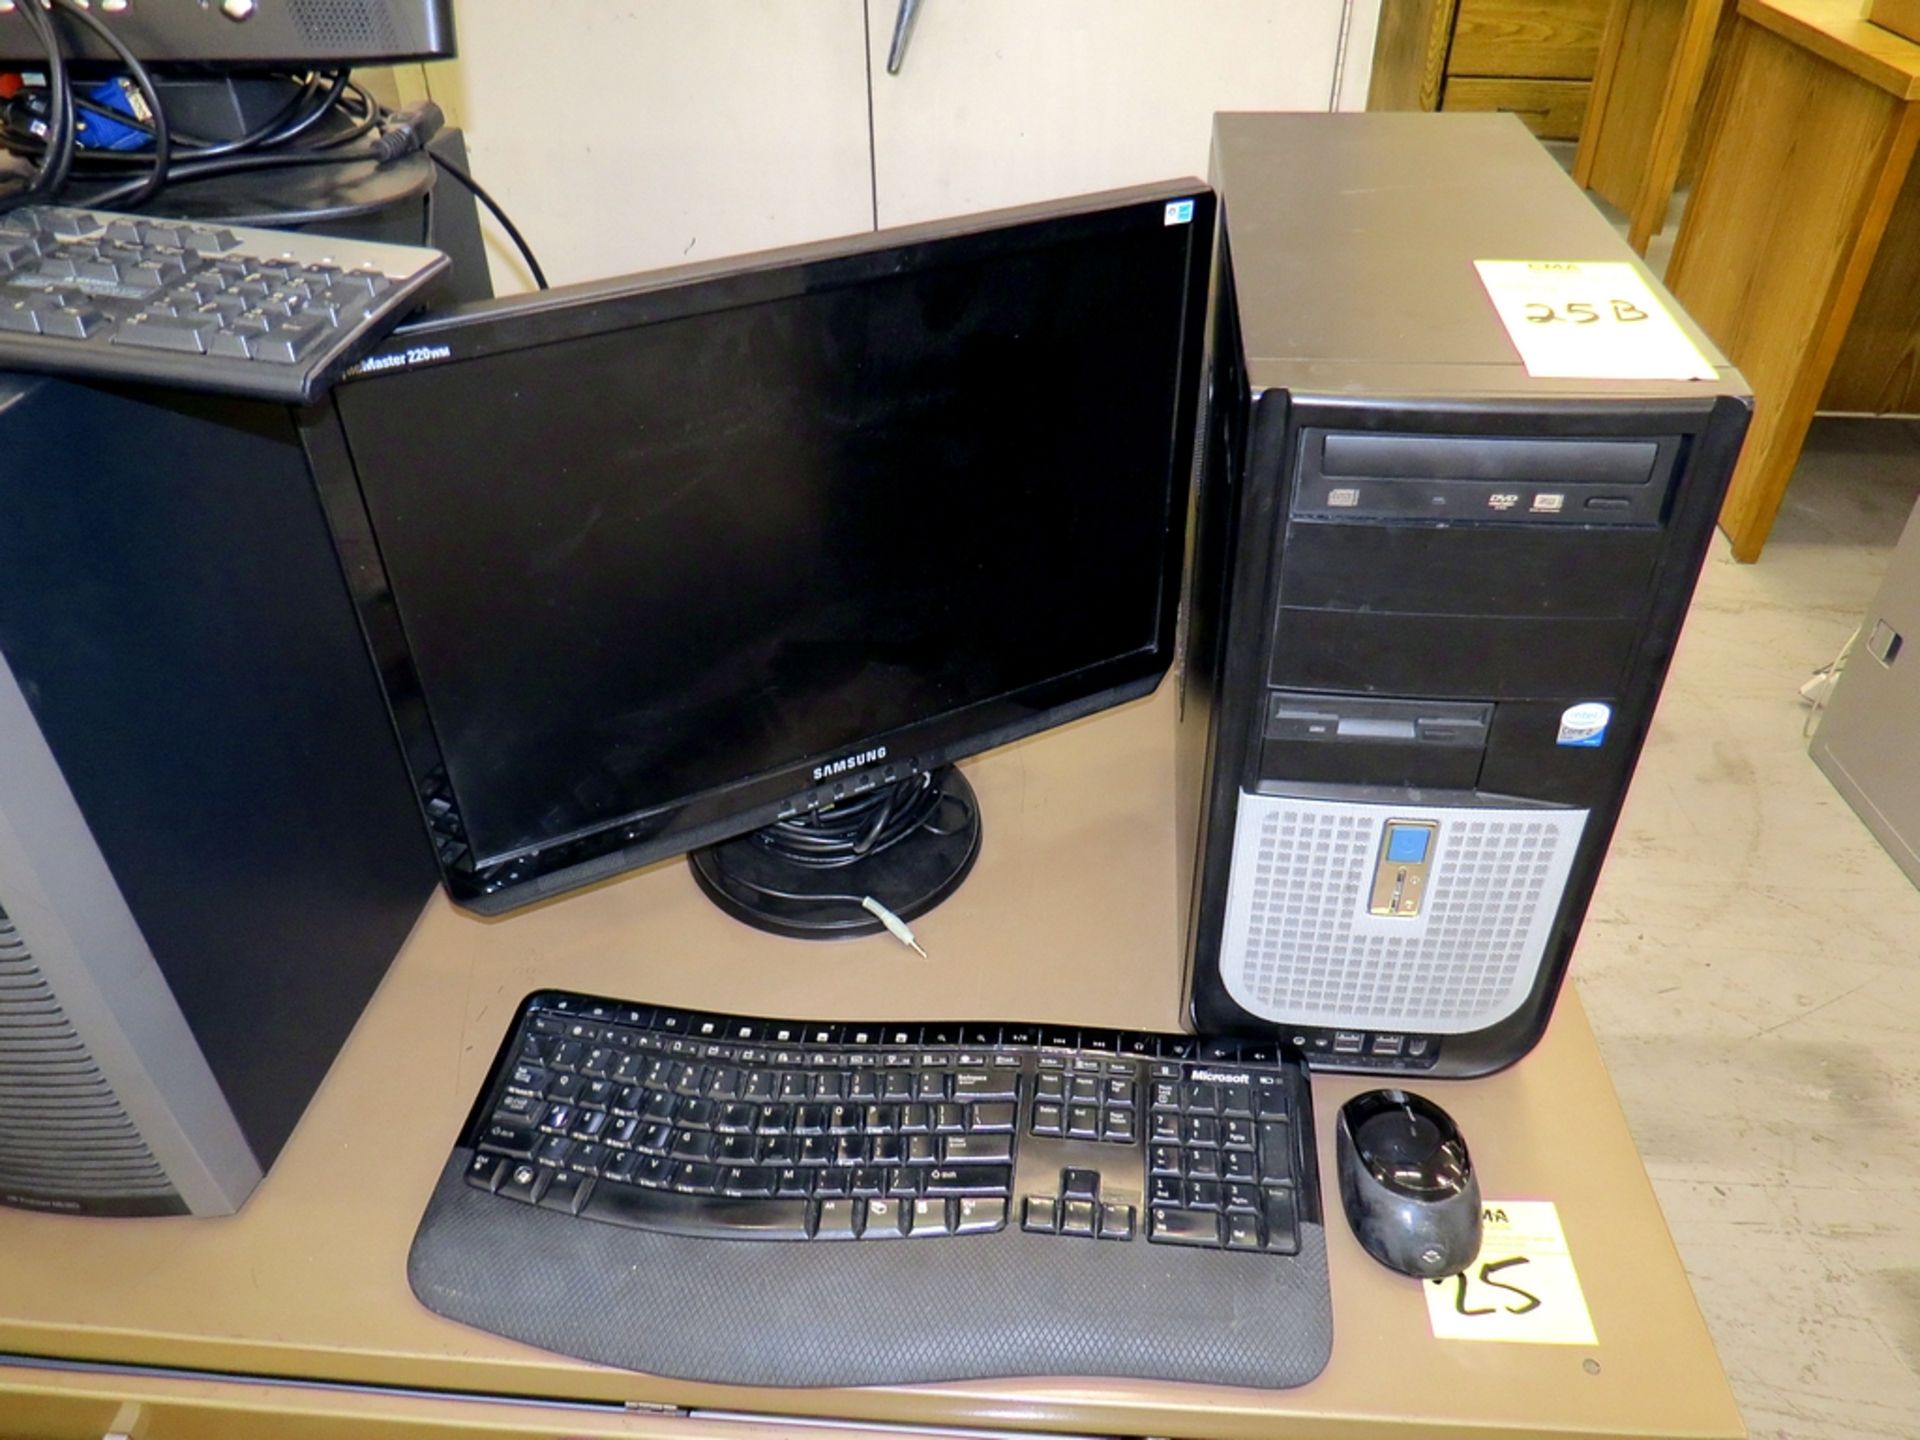 Generic Computer, Core 2 Duo Processor, Samsung Monitor, Keyboard and Mouse